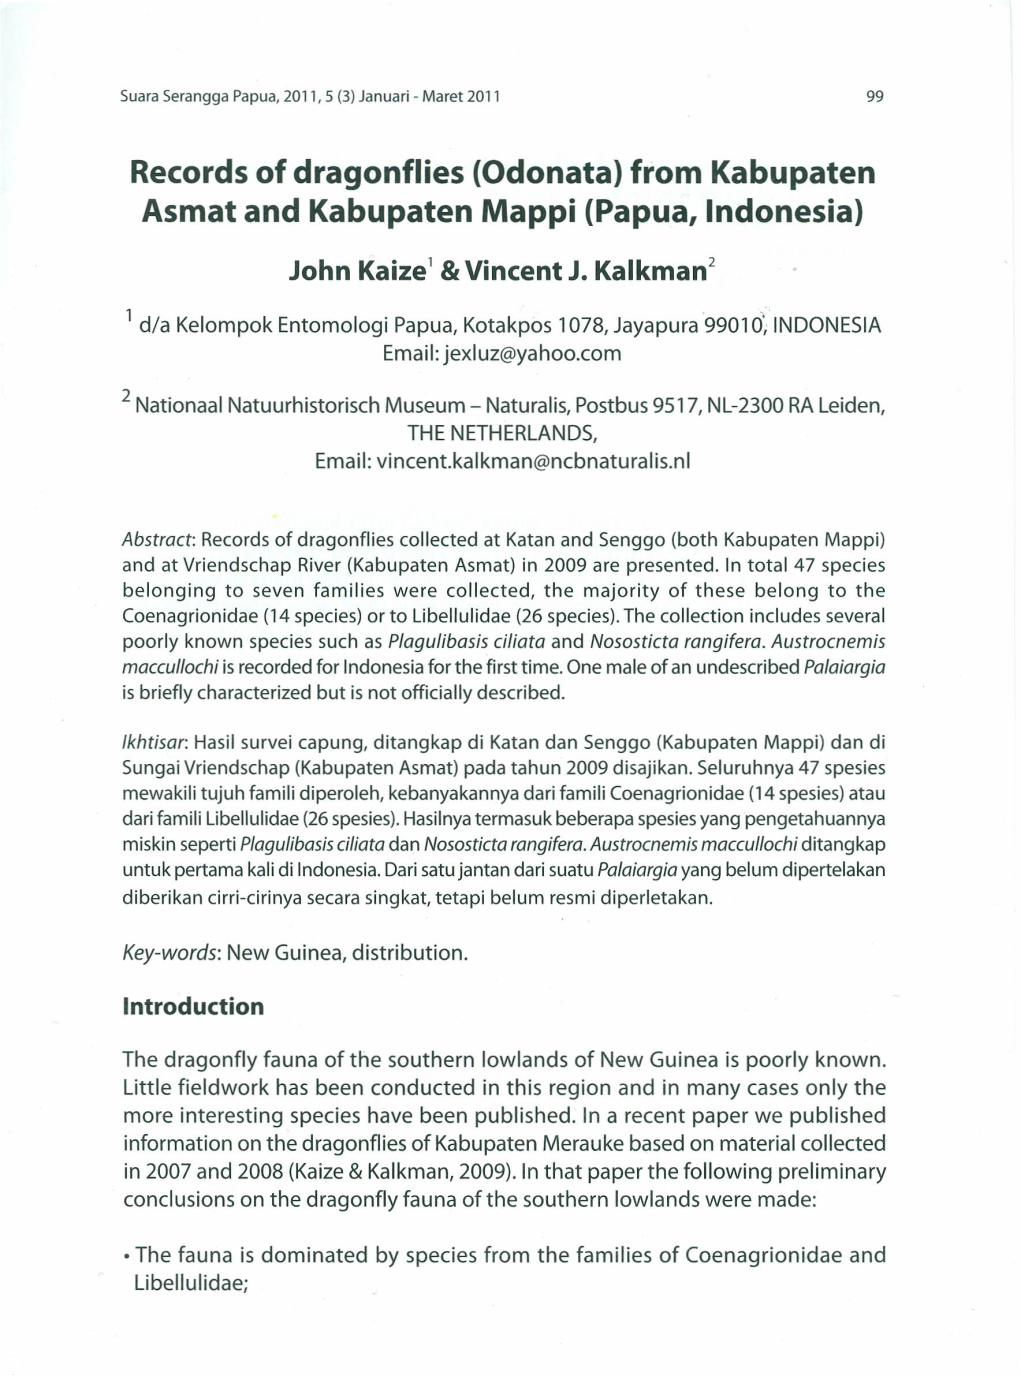 Records of Dragonflies (Odonata) from Kabupaten Asmat and Kabupaten Mappi (Papua, Indonesia)